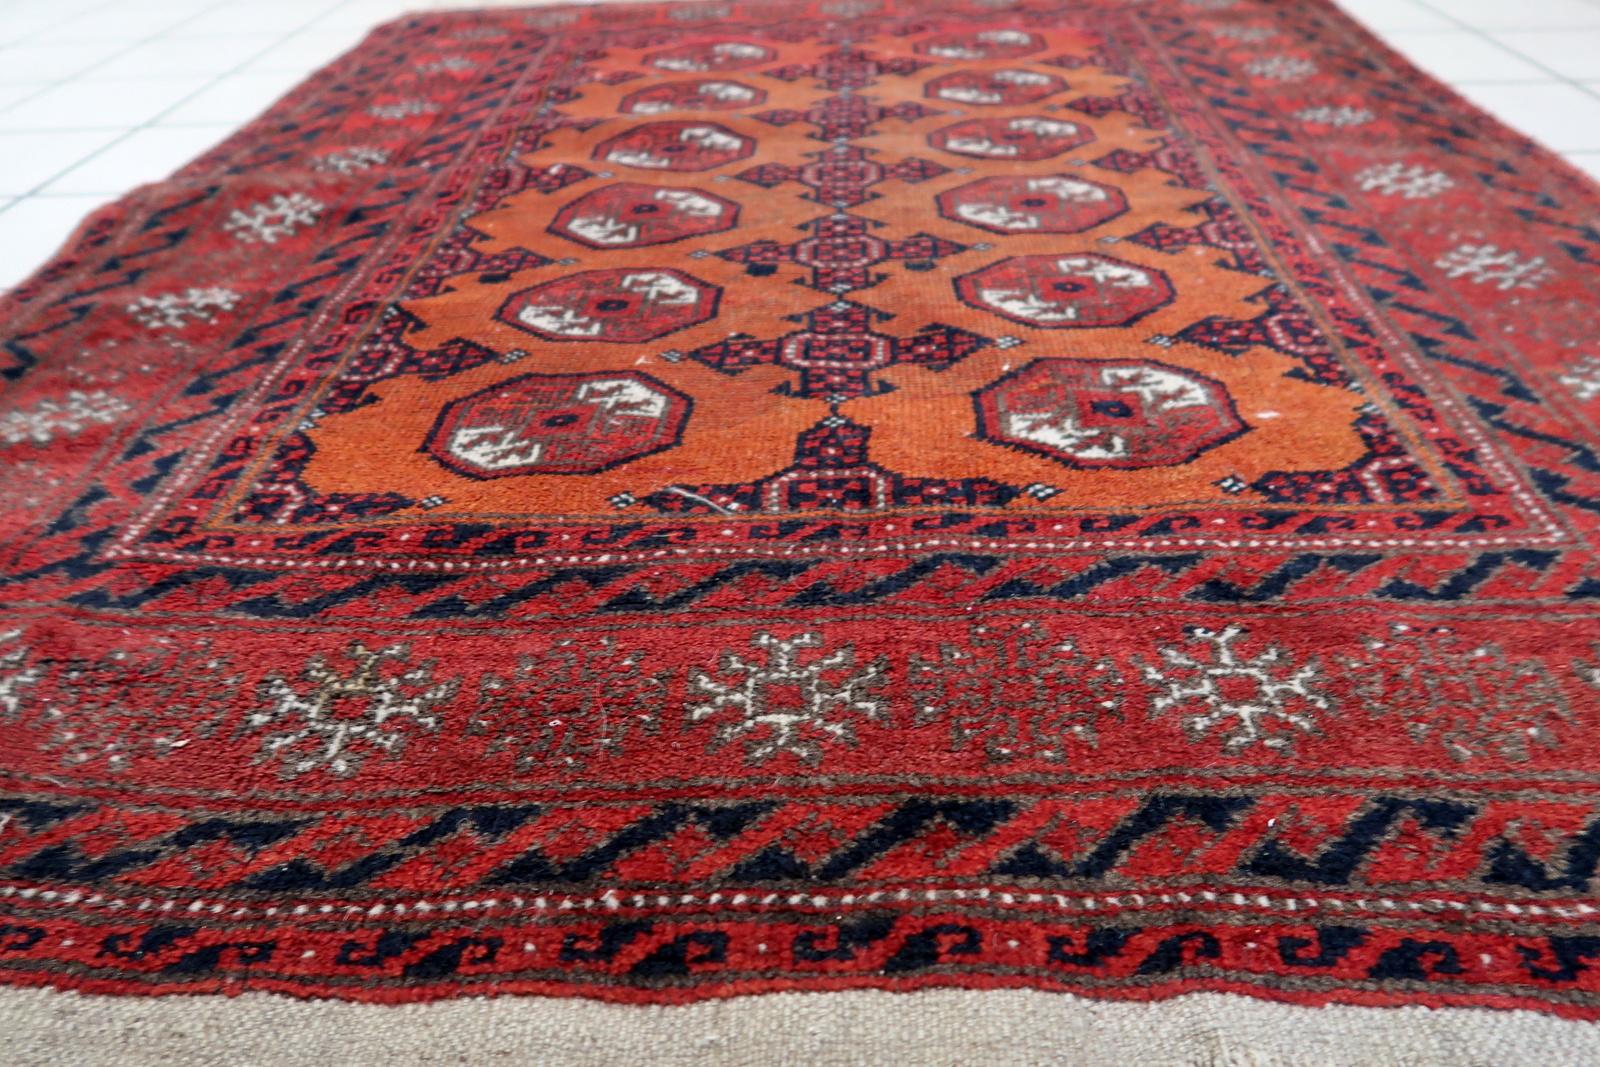 Handmade Antique Afghan Baluch Rug 3.8' x 4.8', 1920s - 1C1141 For Sale 5